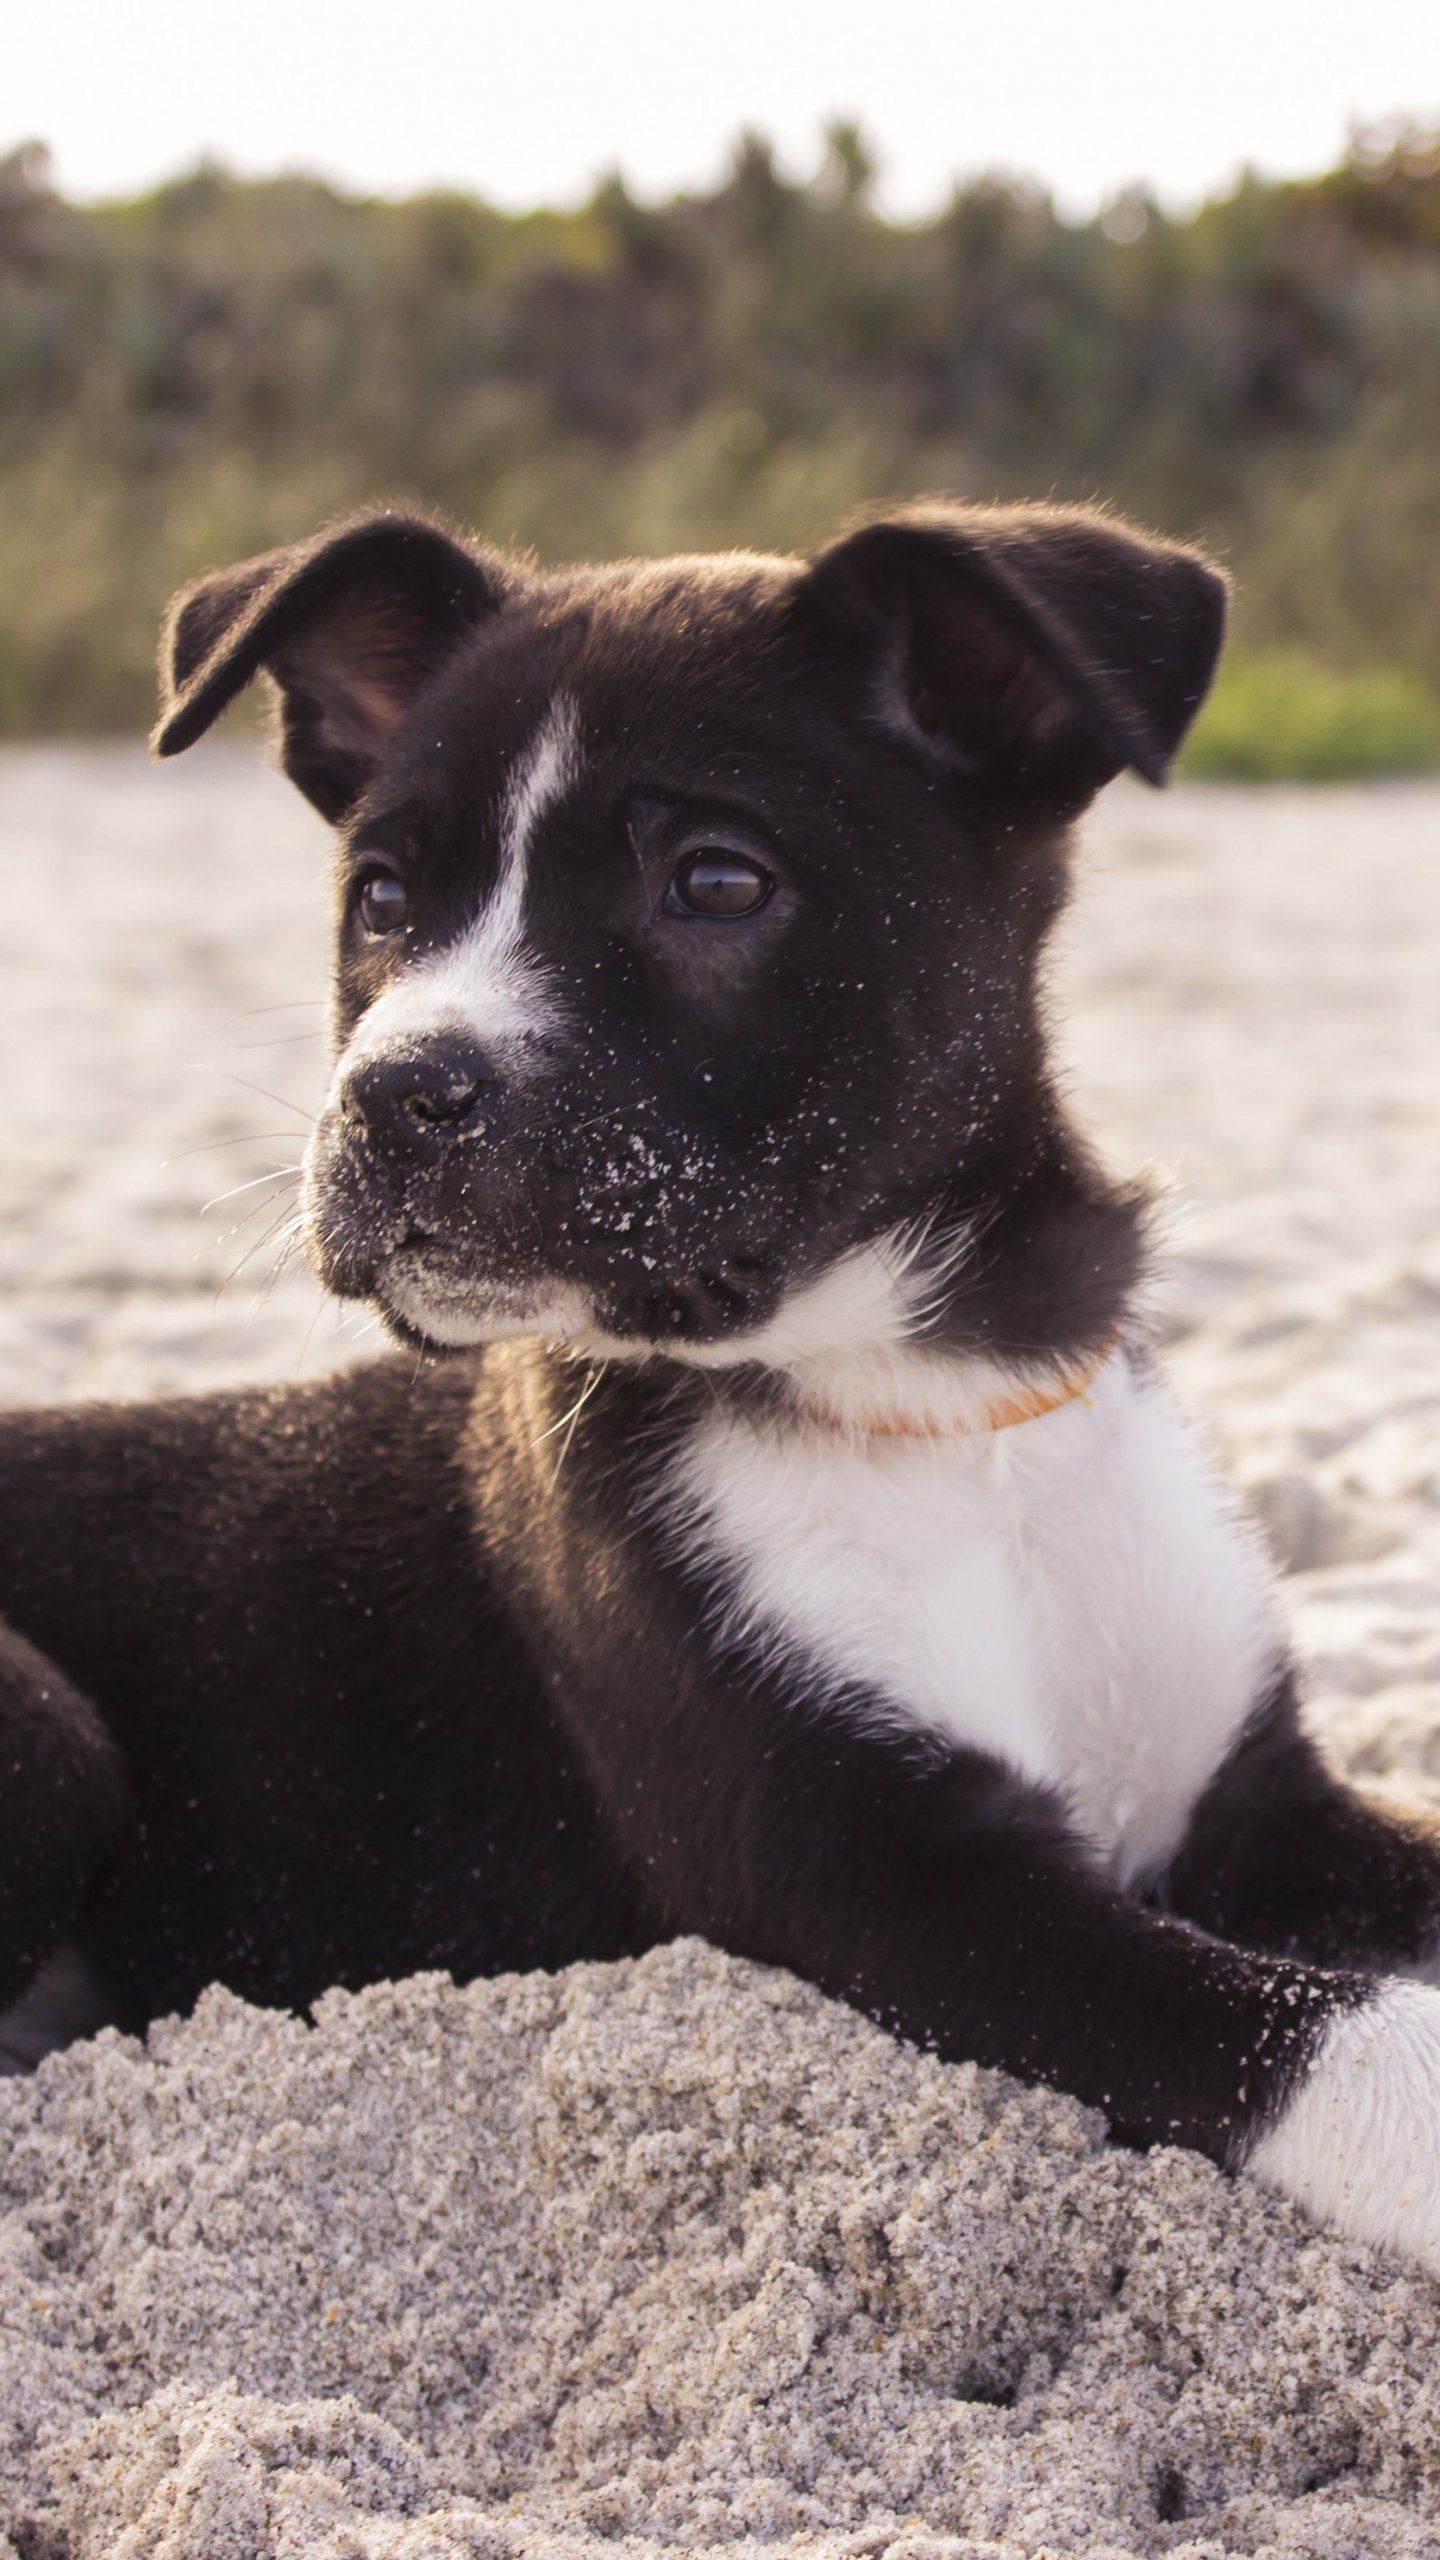 Puppy on the Beach Wallpaper, Android & Desktop Background